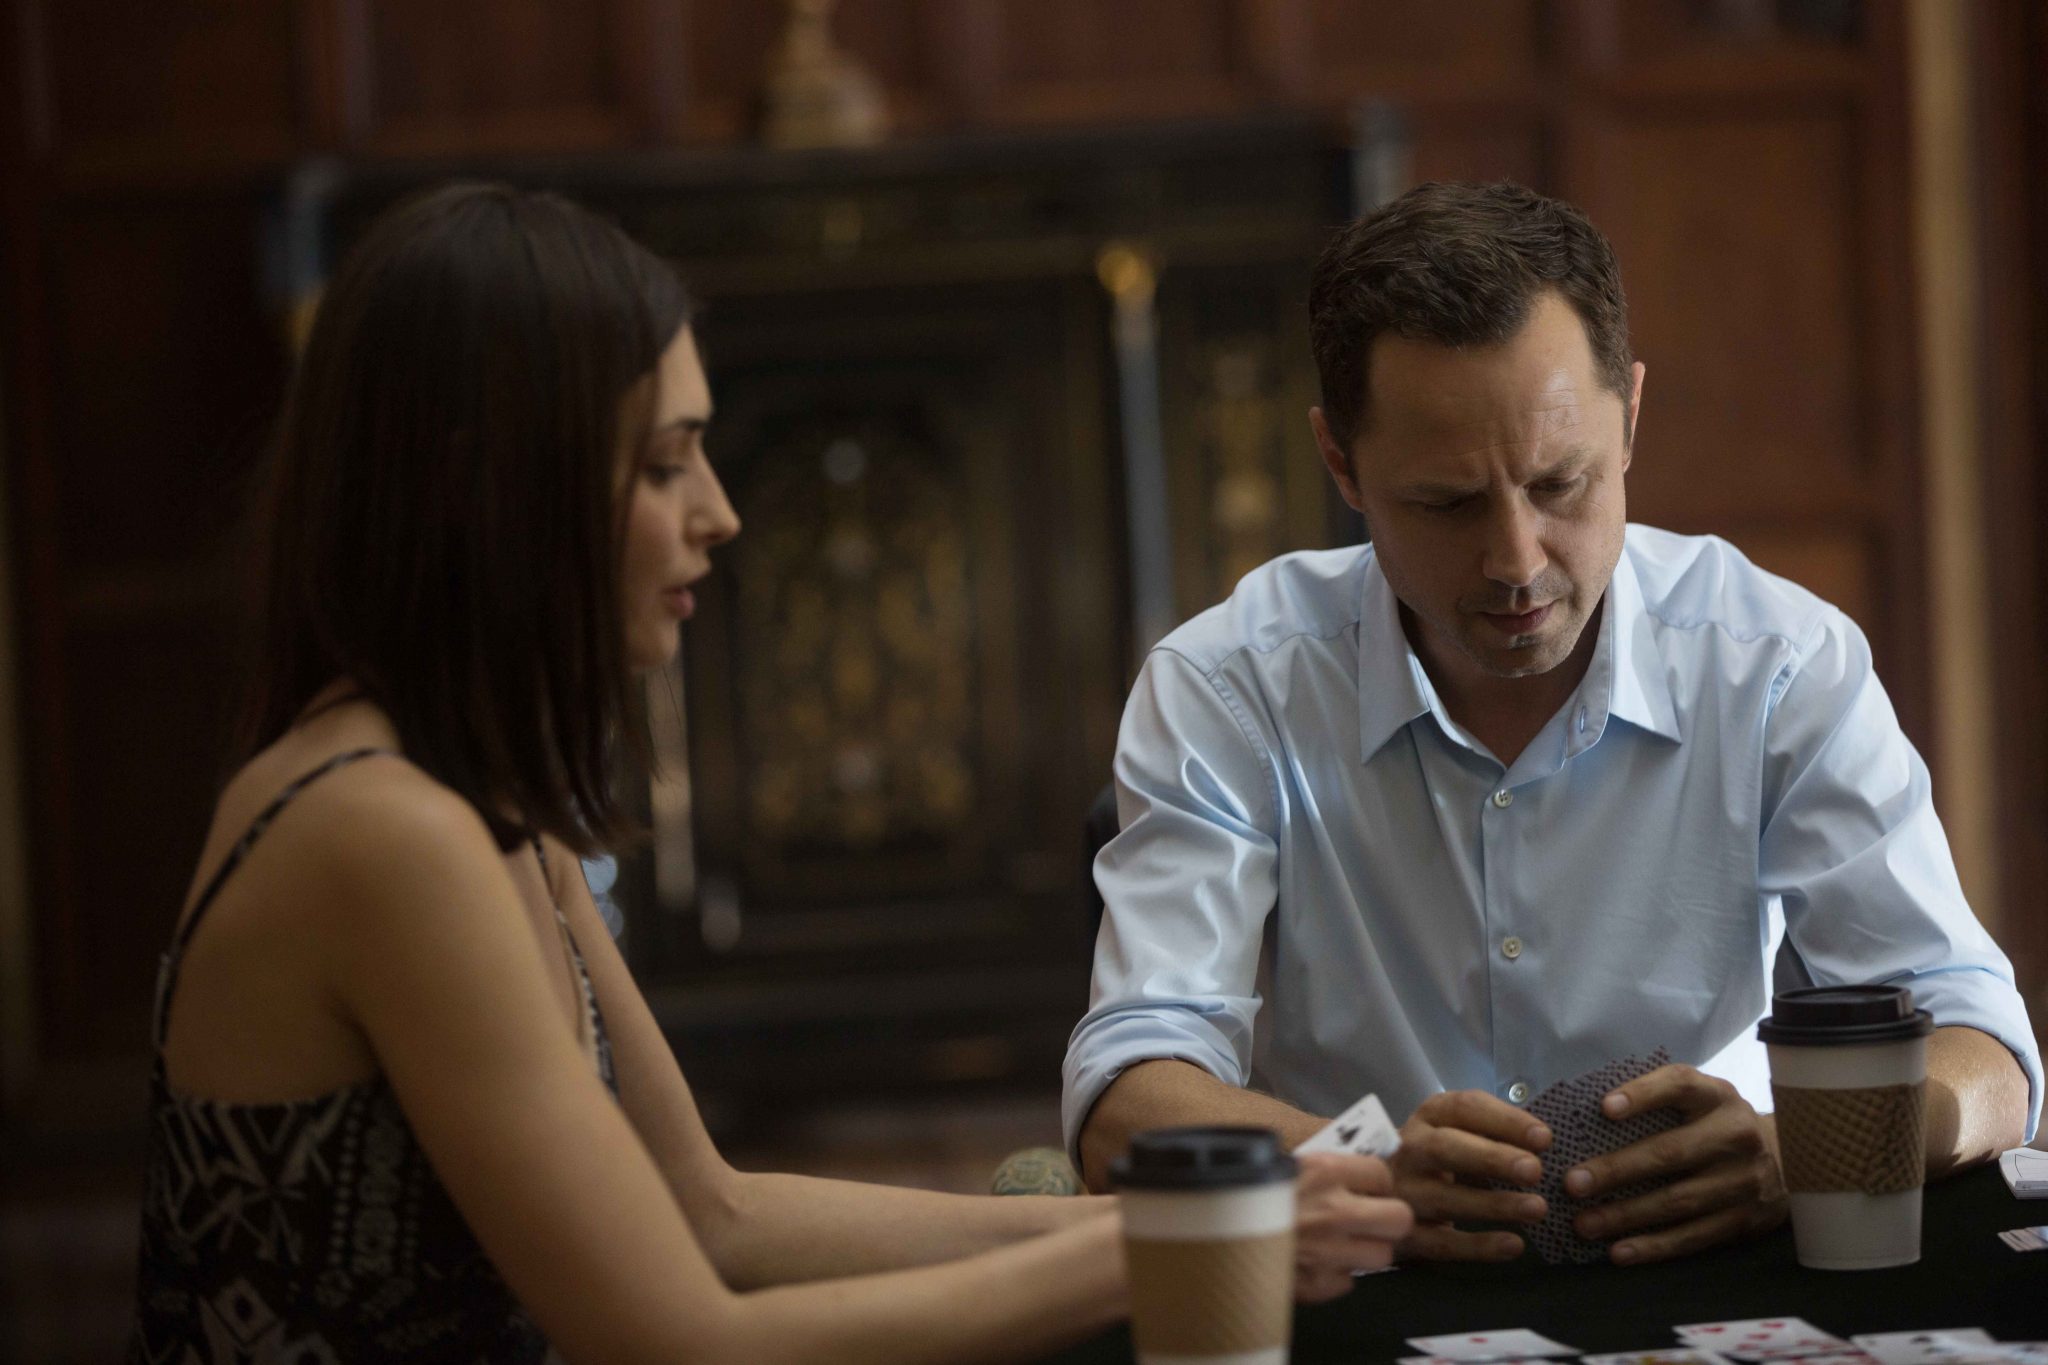 From left to right: Justine Cotsonas as Shannon and Giovanni Ribisi as Marius/Pete. Photo Credit: Amazon Prime Video/Eric Liebowitz.